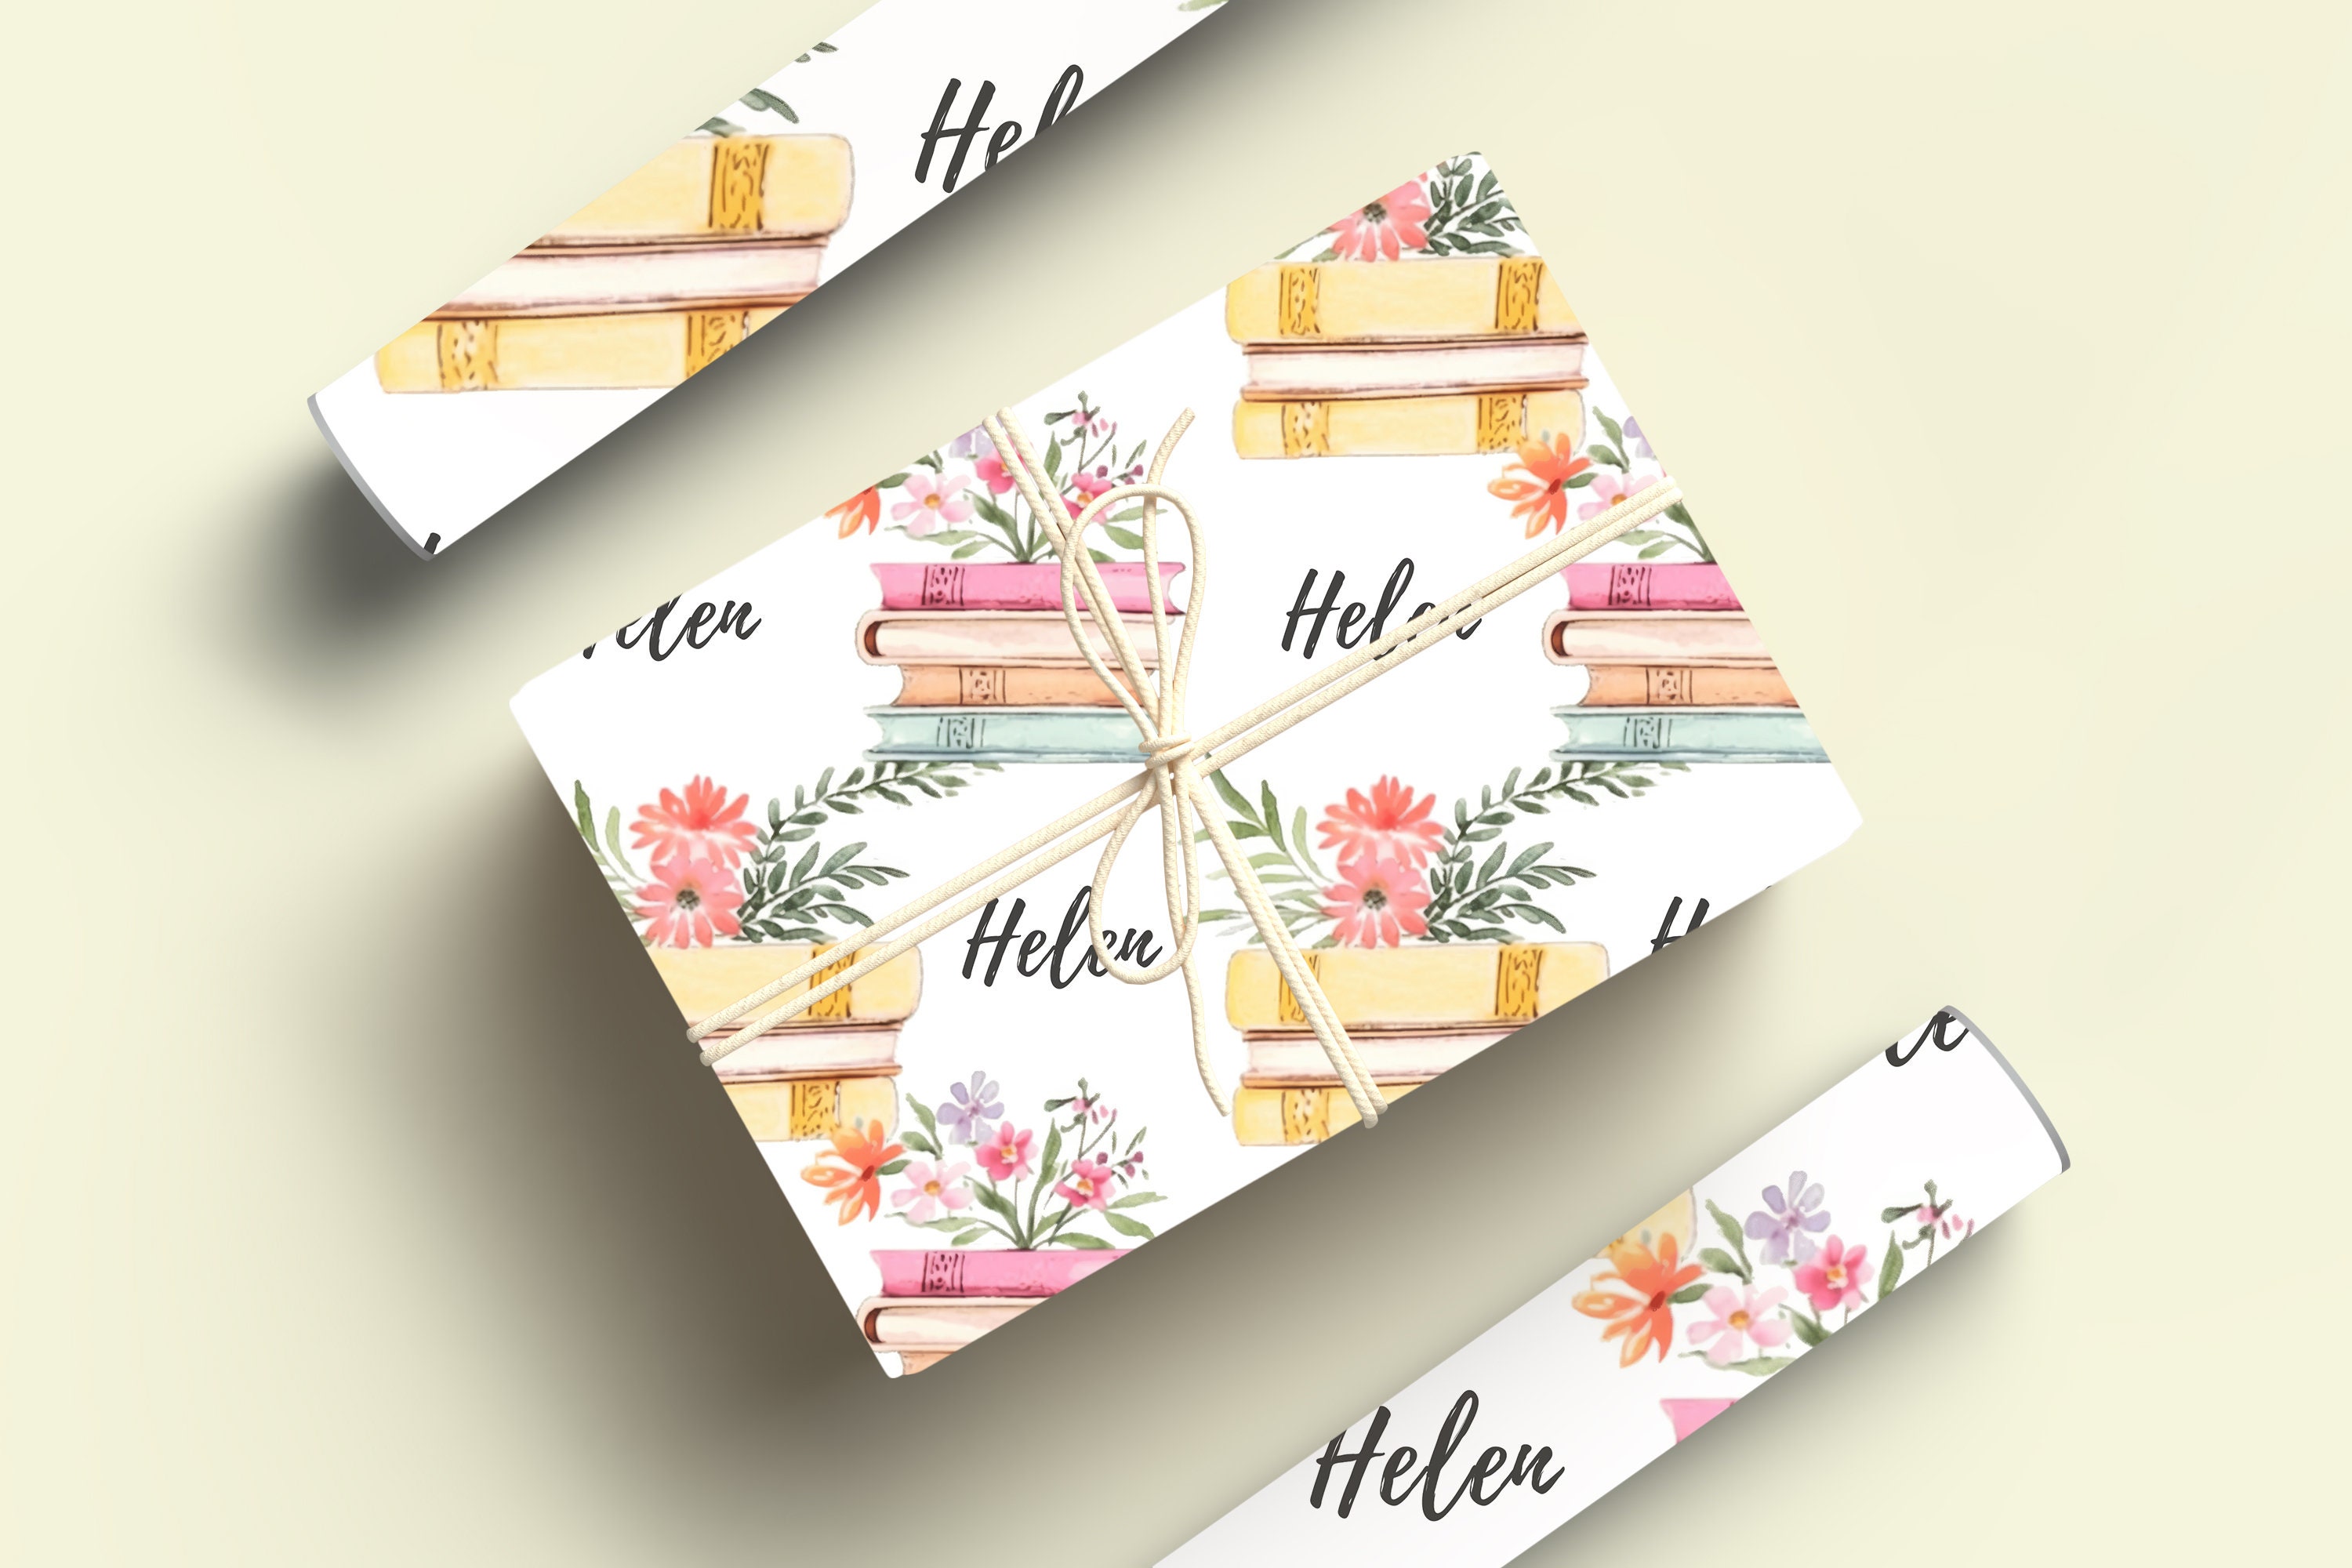 Customized Name Book Wrapping Paper With Books, Booklovers